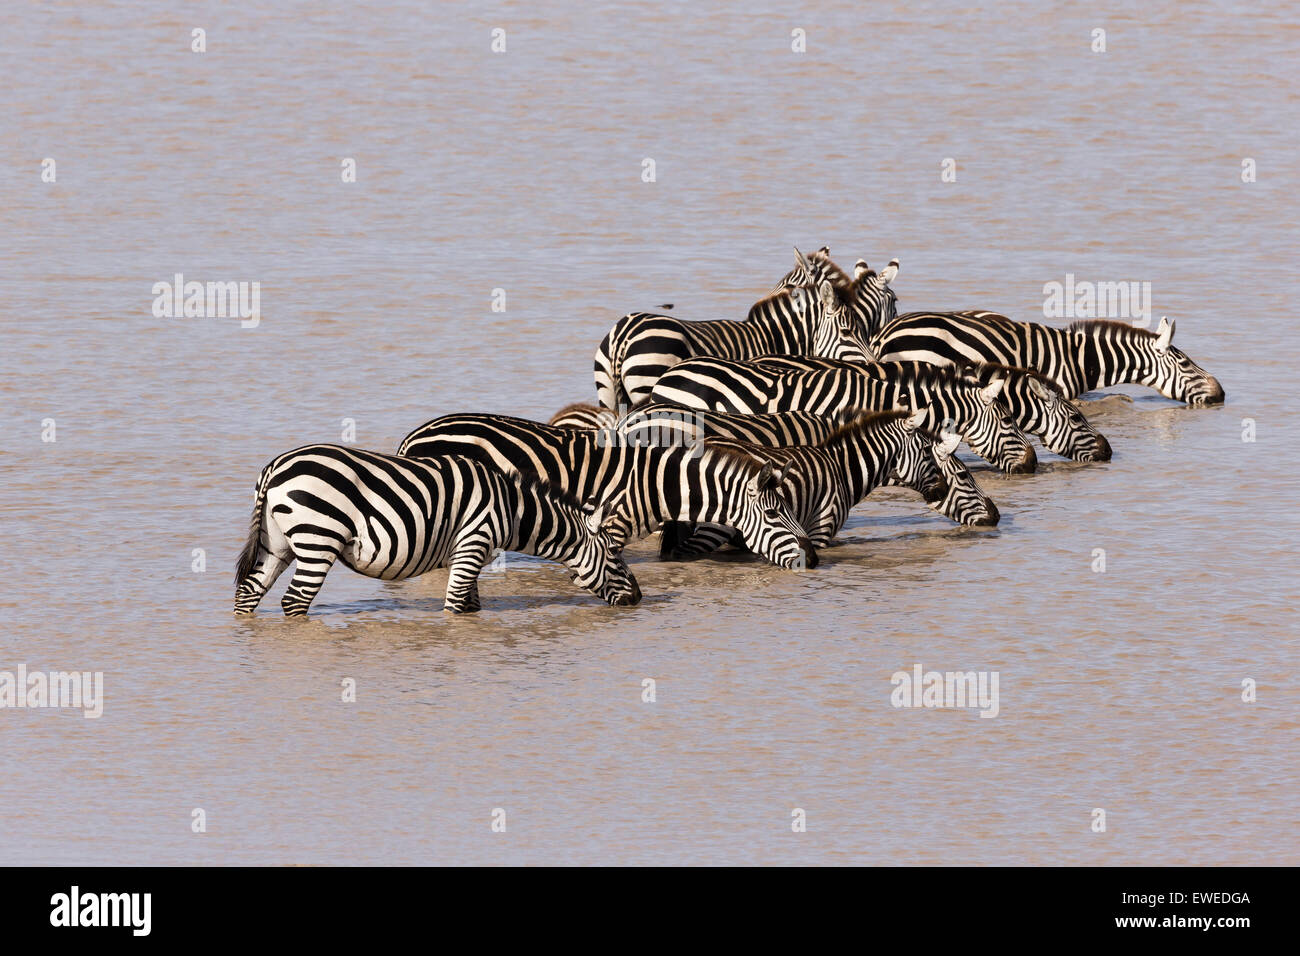 Plains zebra drink at a water hole in the Serengeti Tanzania Stock Photo